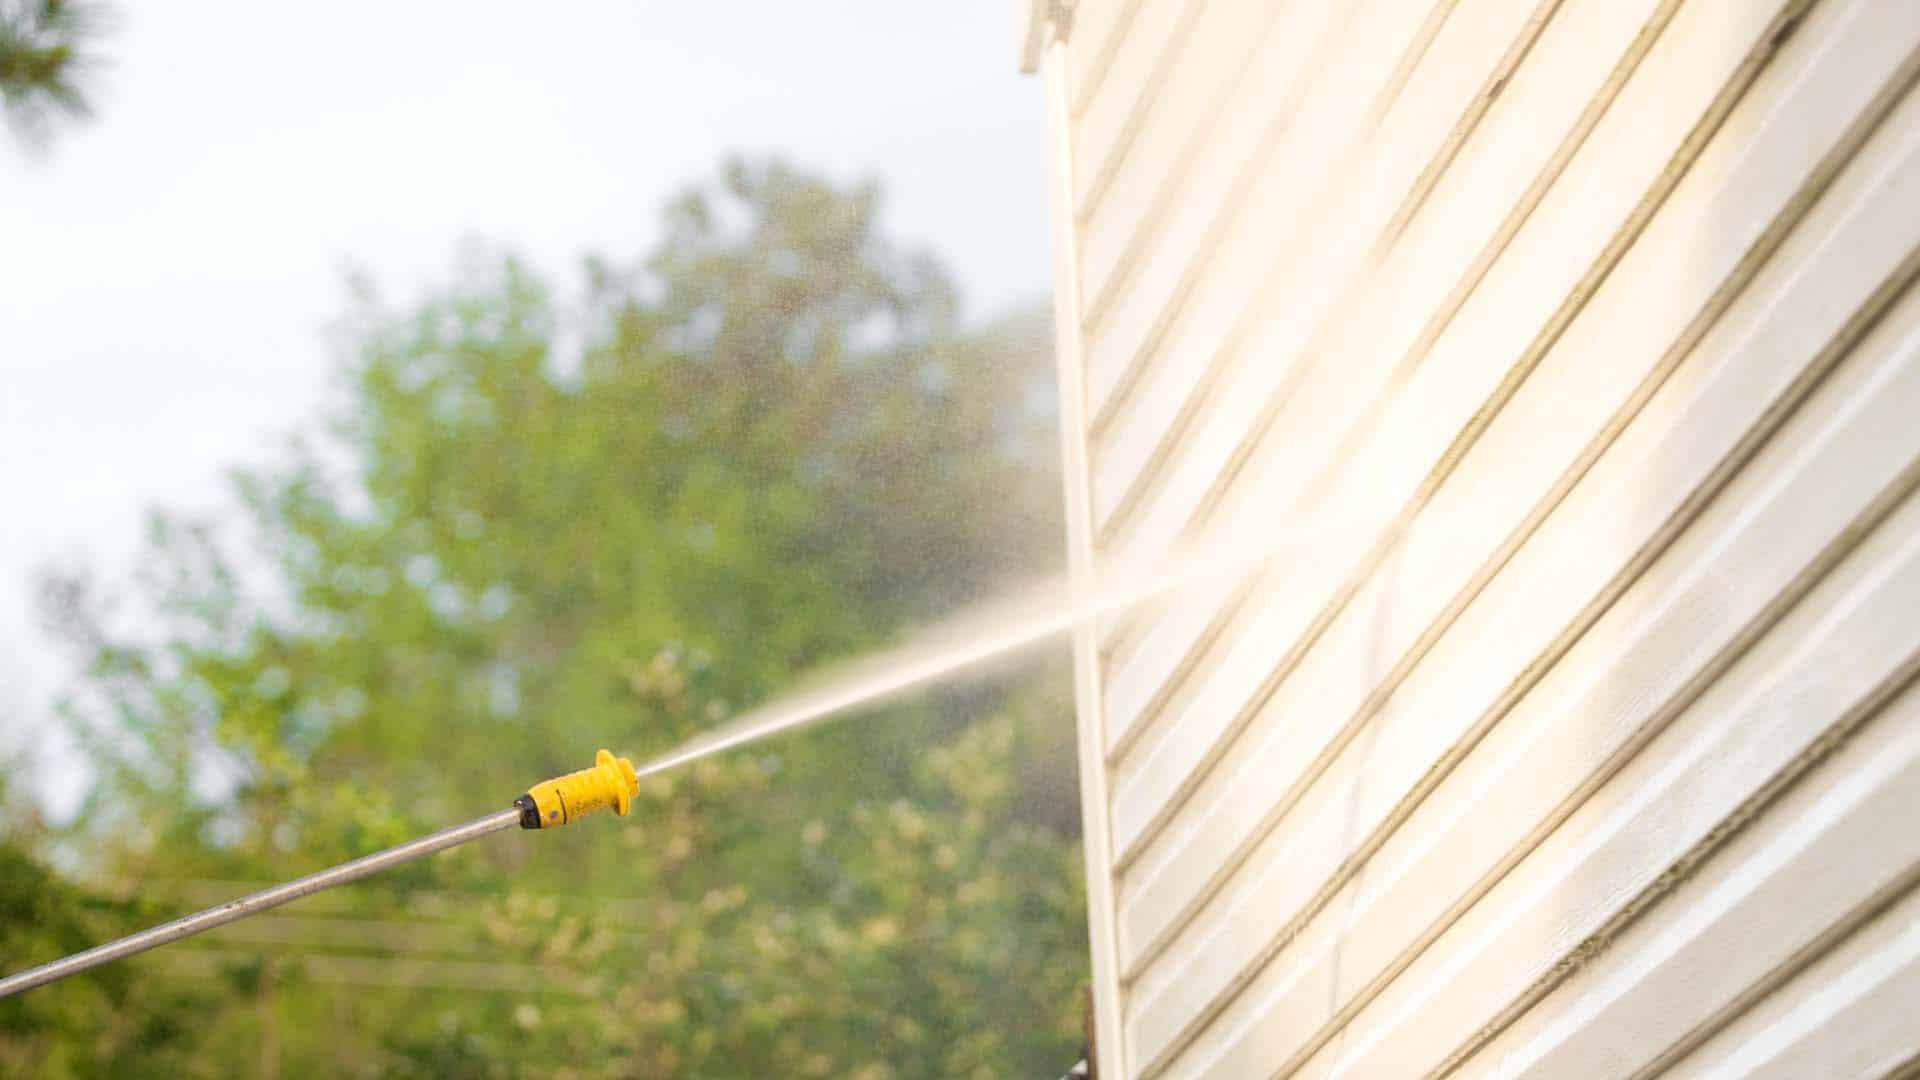 Professional Pressure Cleaning of house